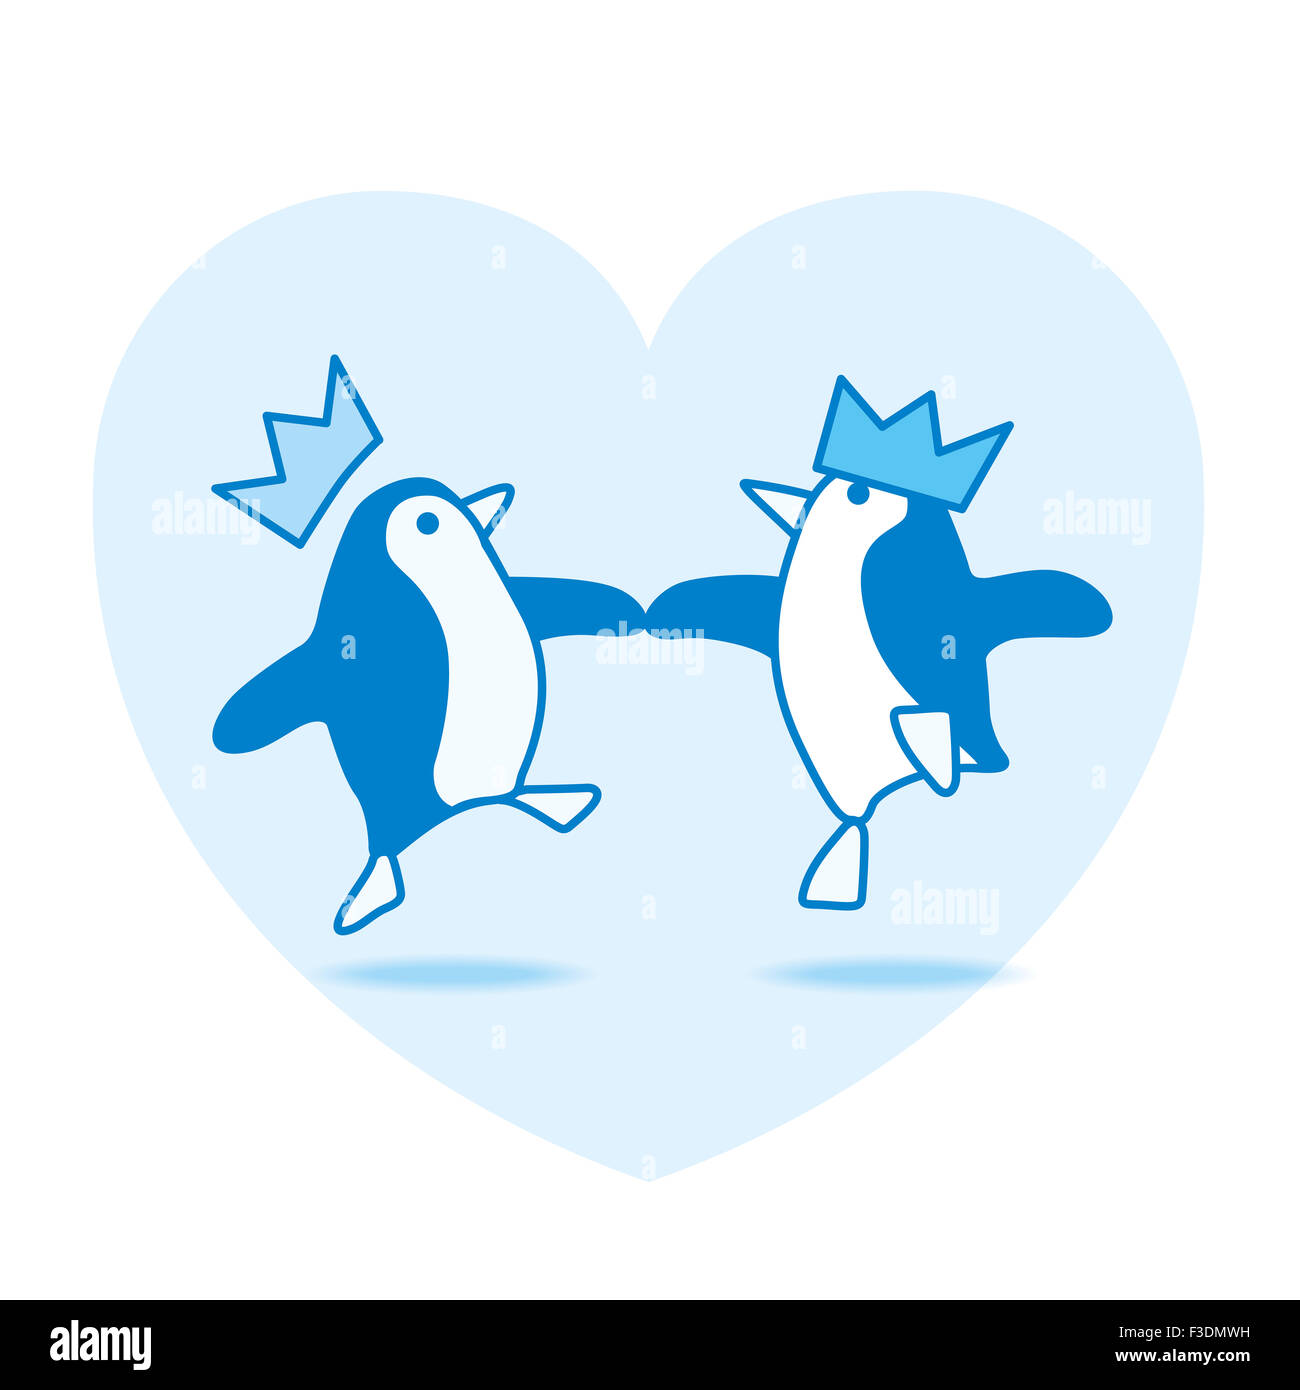 Two Happy Blue Penguins wearing Party Hats Dancing on Blue Heart on White Background Stock Photo